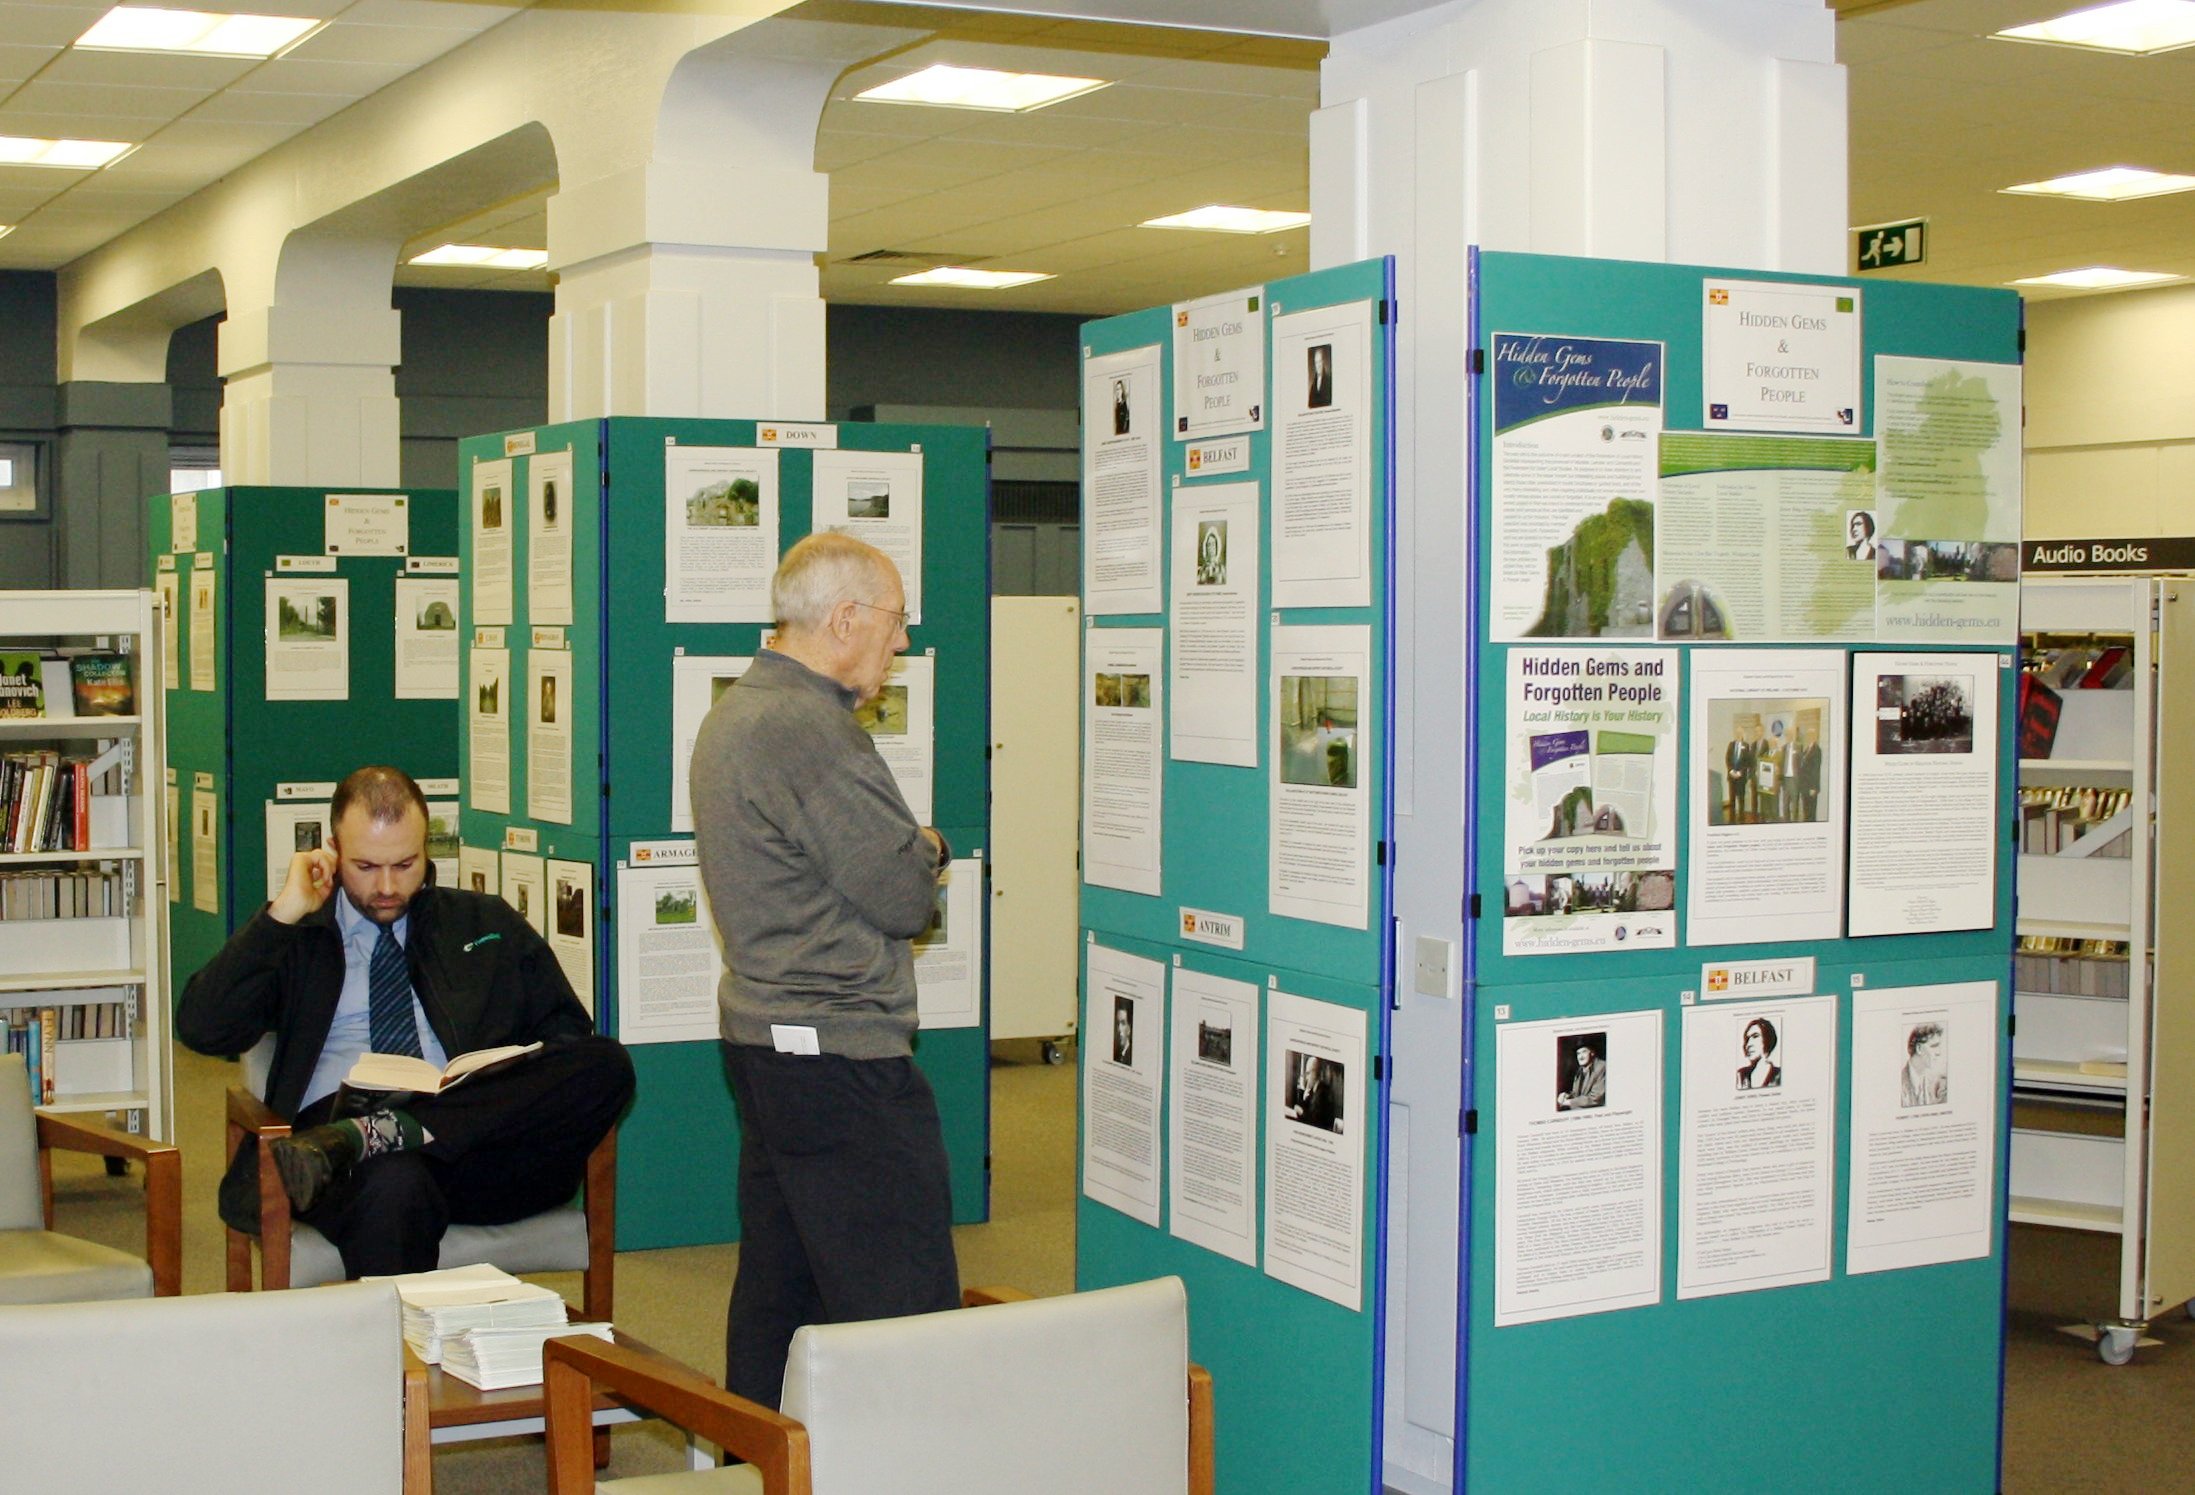 The Exhibition - over 60 exhibits from 30 Counties